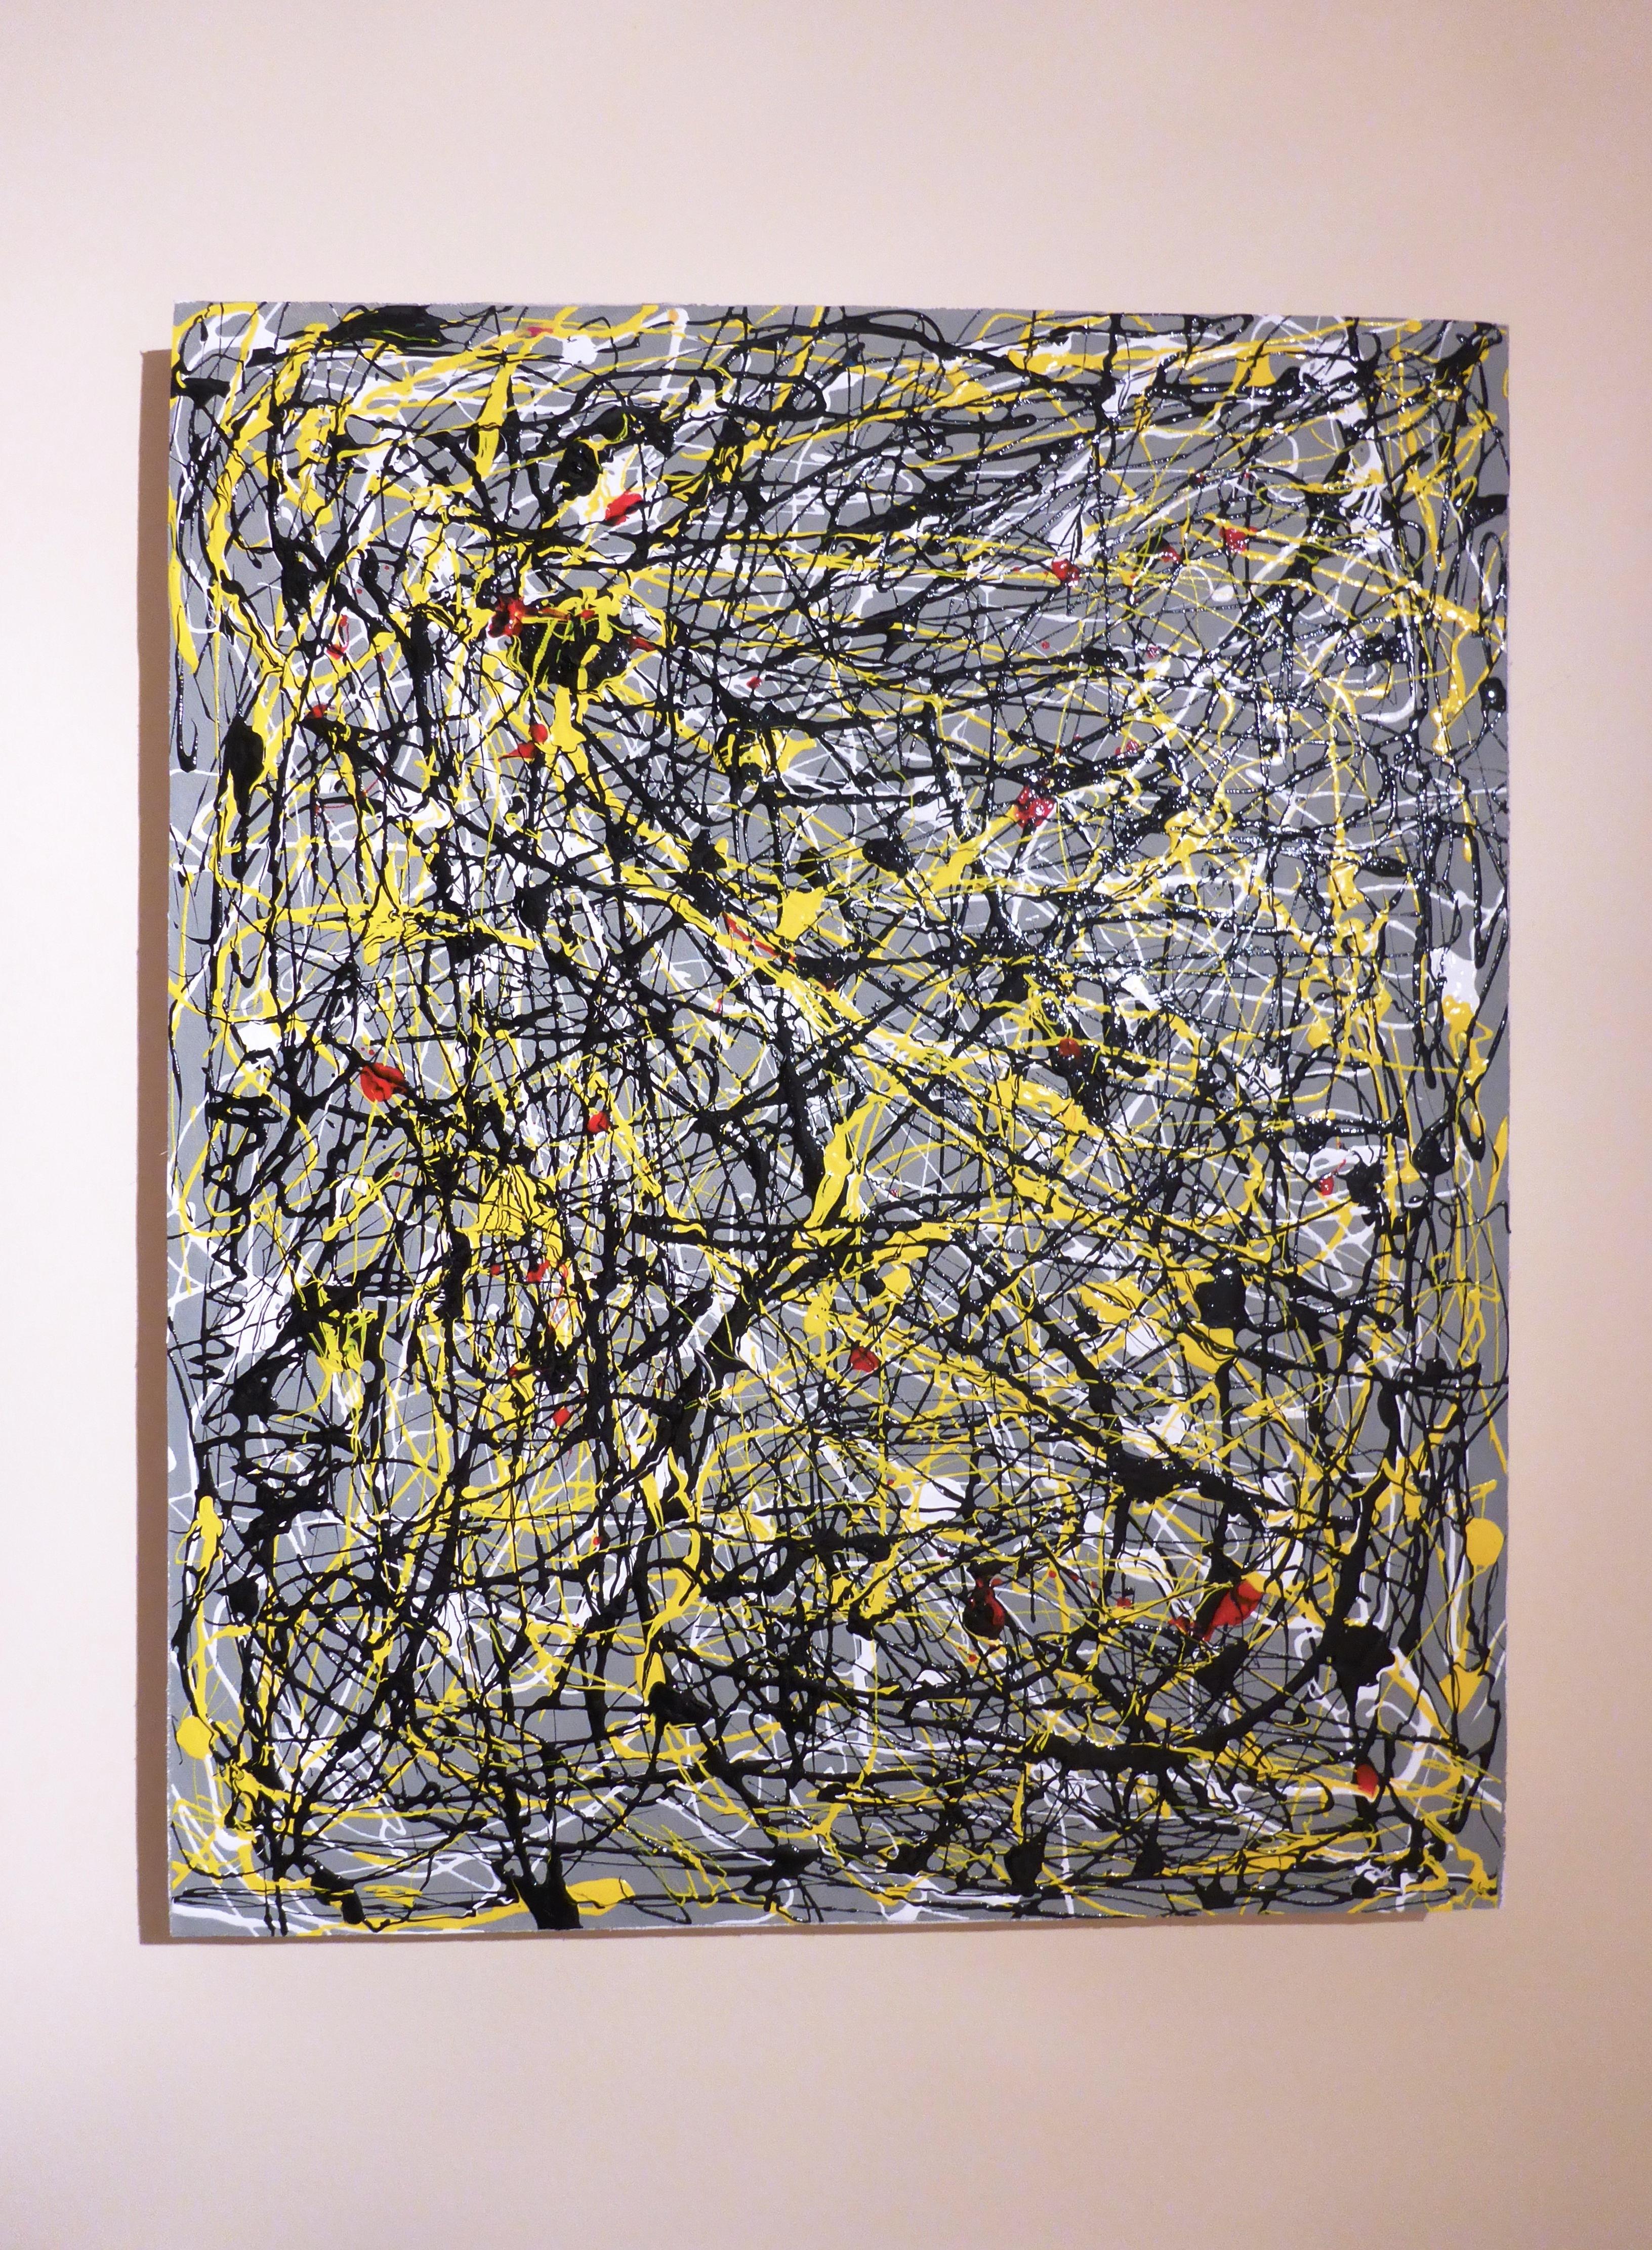 This painting has been created by using the dripping and the pouring techniques, used by Jackson Pollock in most of his artworks. The matter "dances" on the canvas and expresses the artist's emotions and feelings without having to touch the canvas 